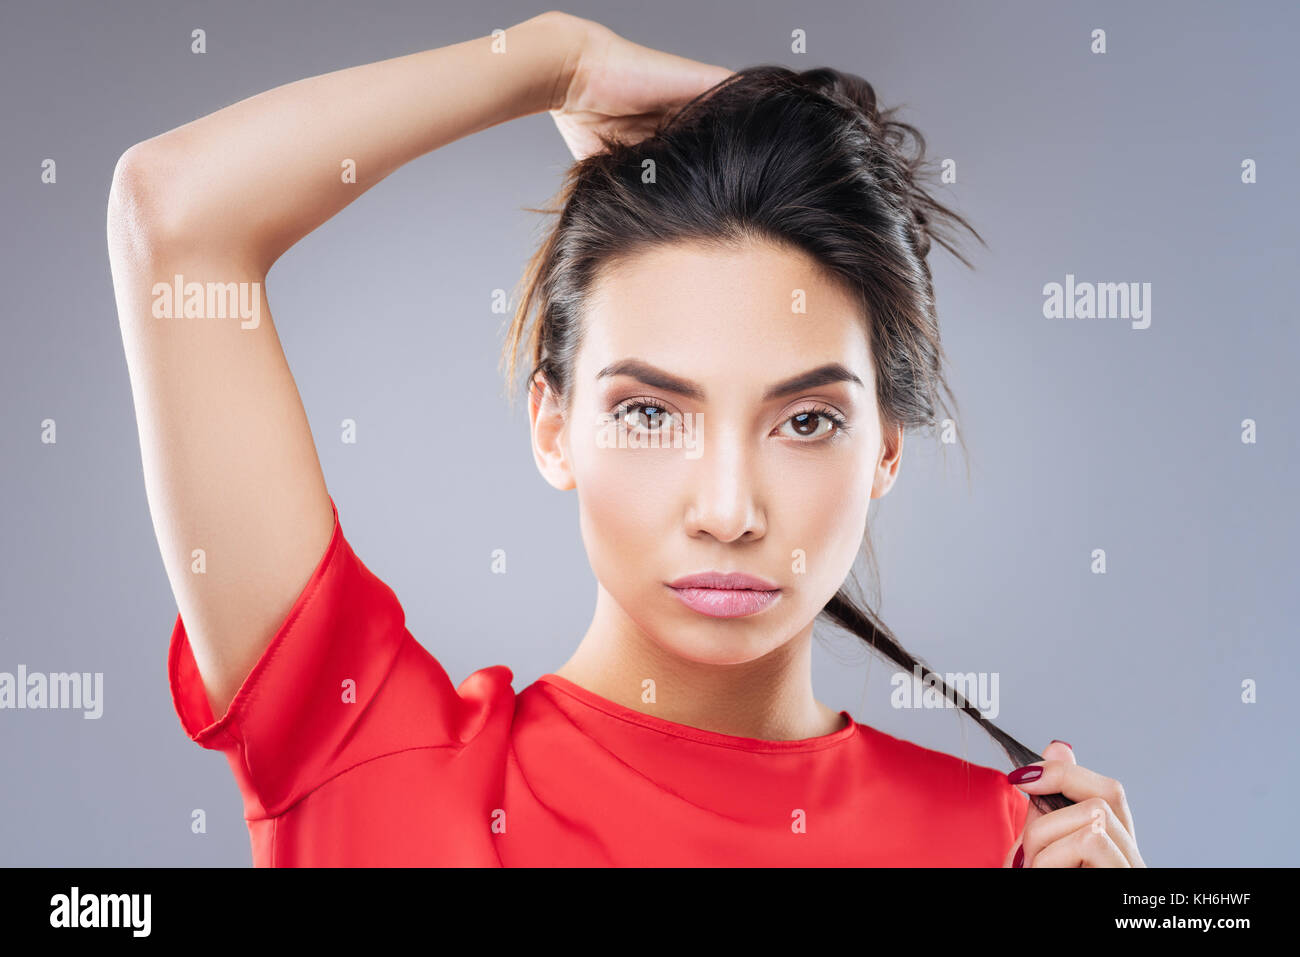 Beautiful young woman looking for the most appropriate hairstyle Stock Photo